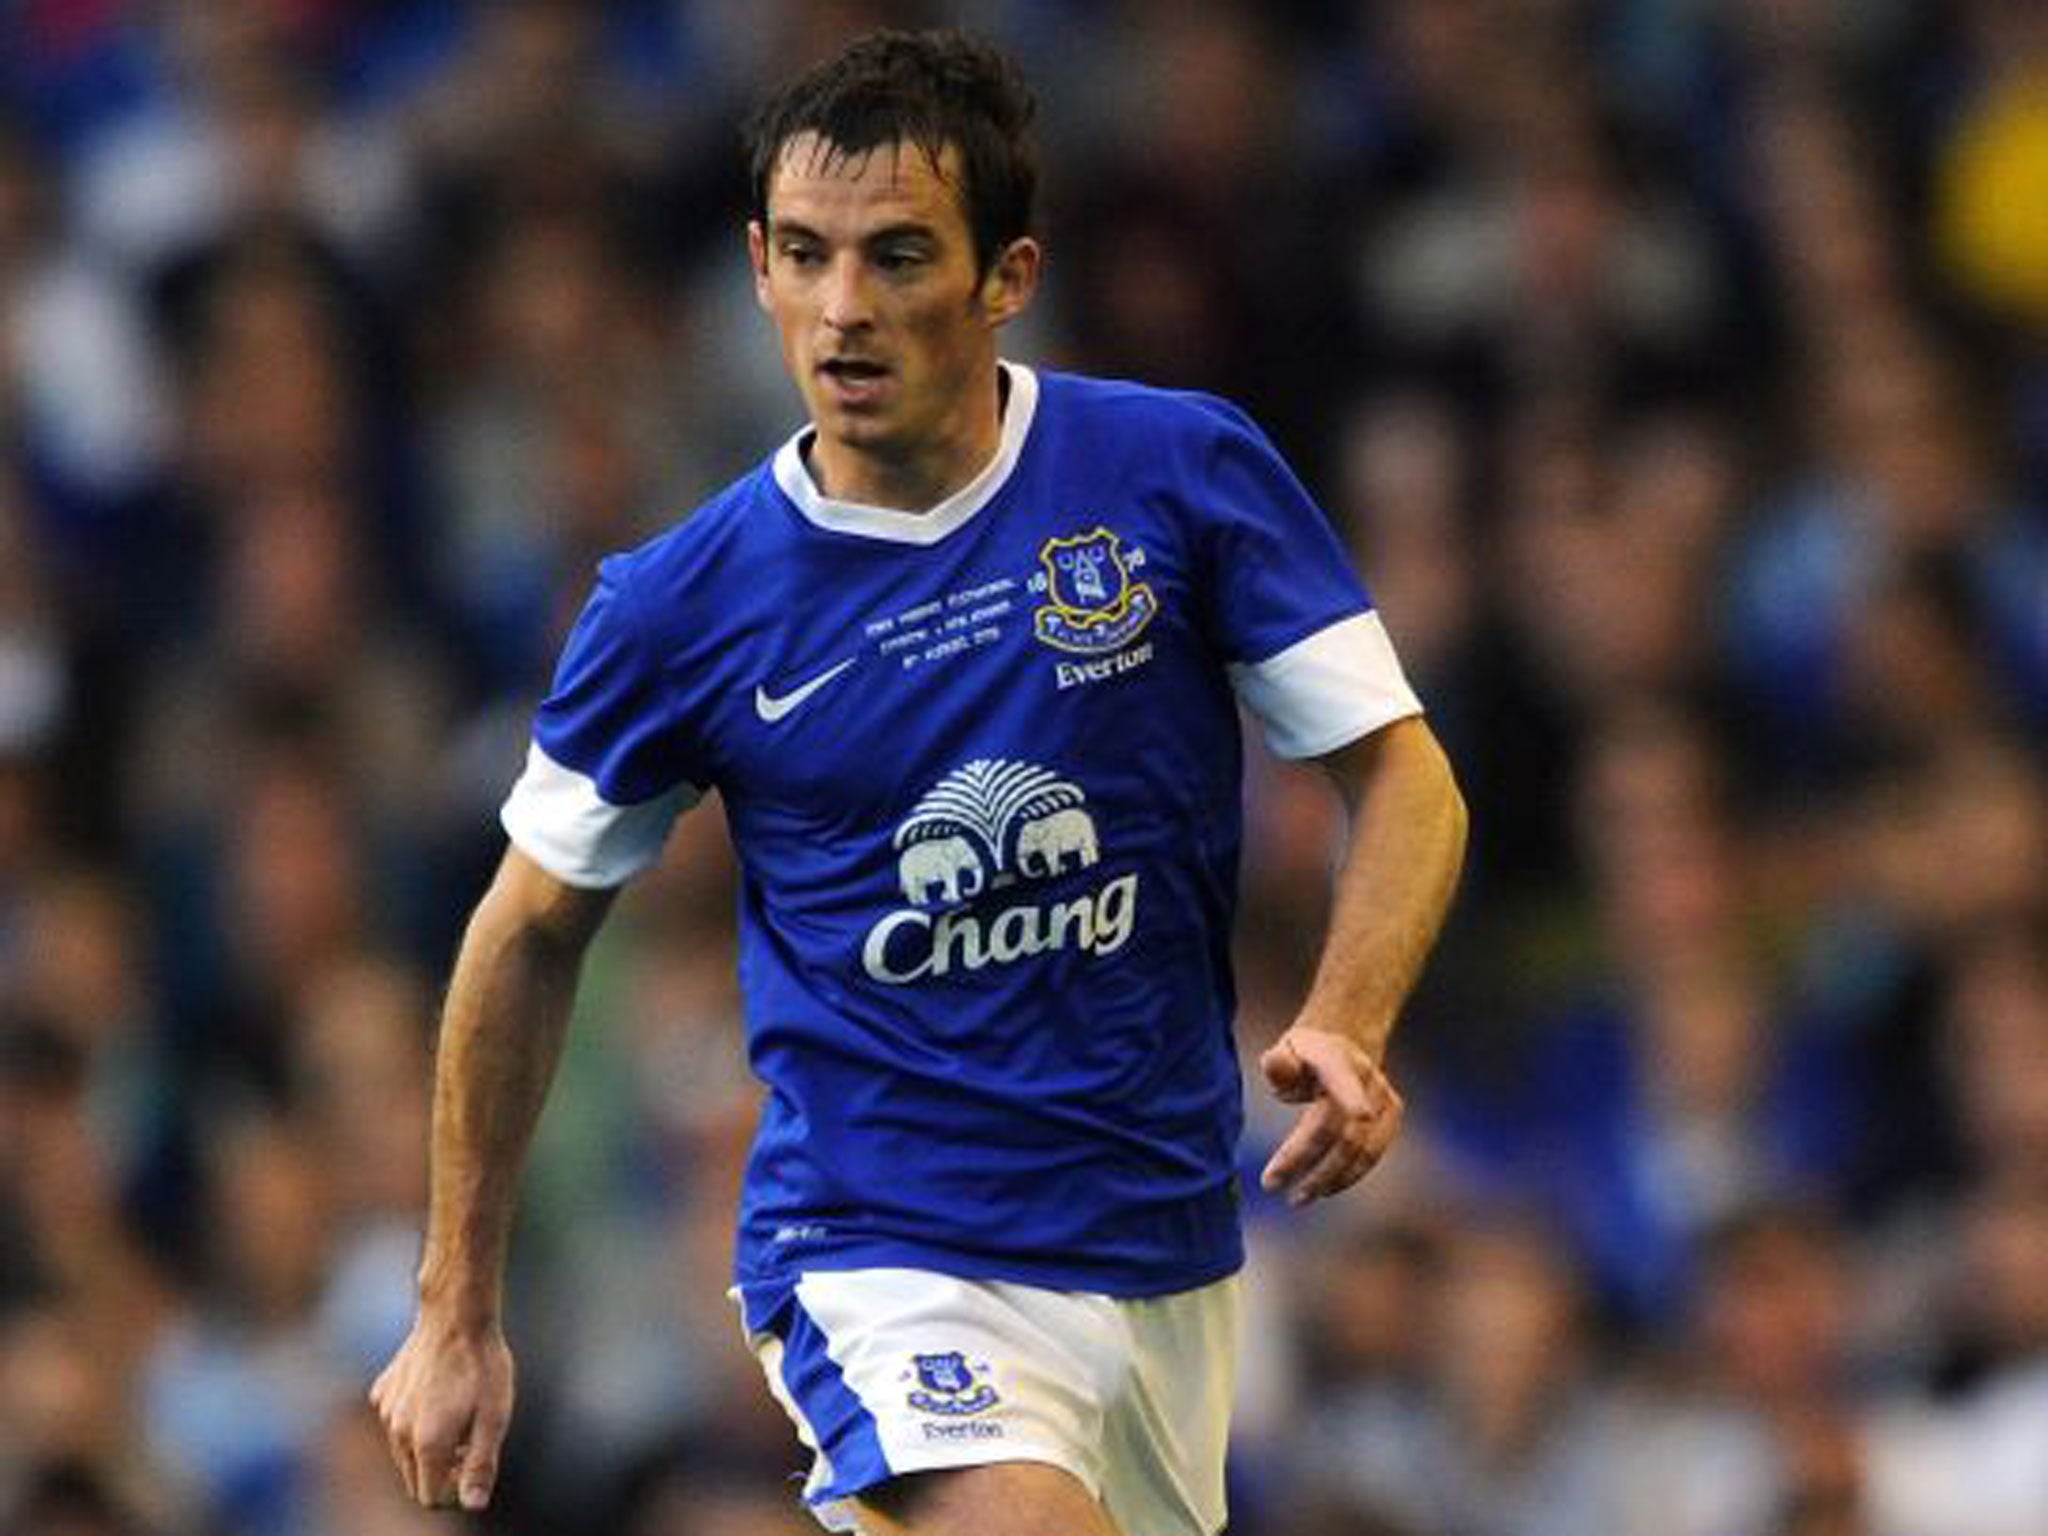 Left-back Leighton Baines has impressed in his five years at Goodison Park